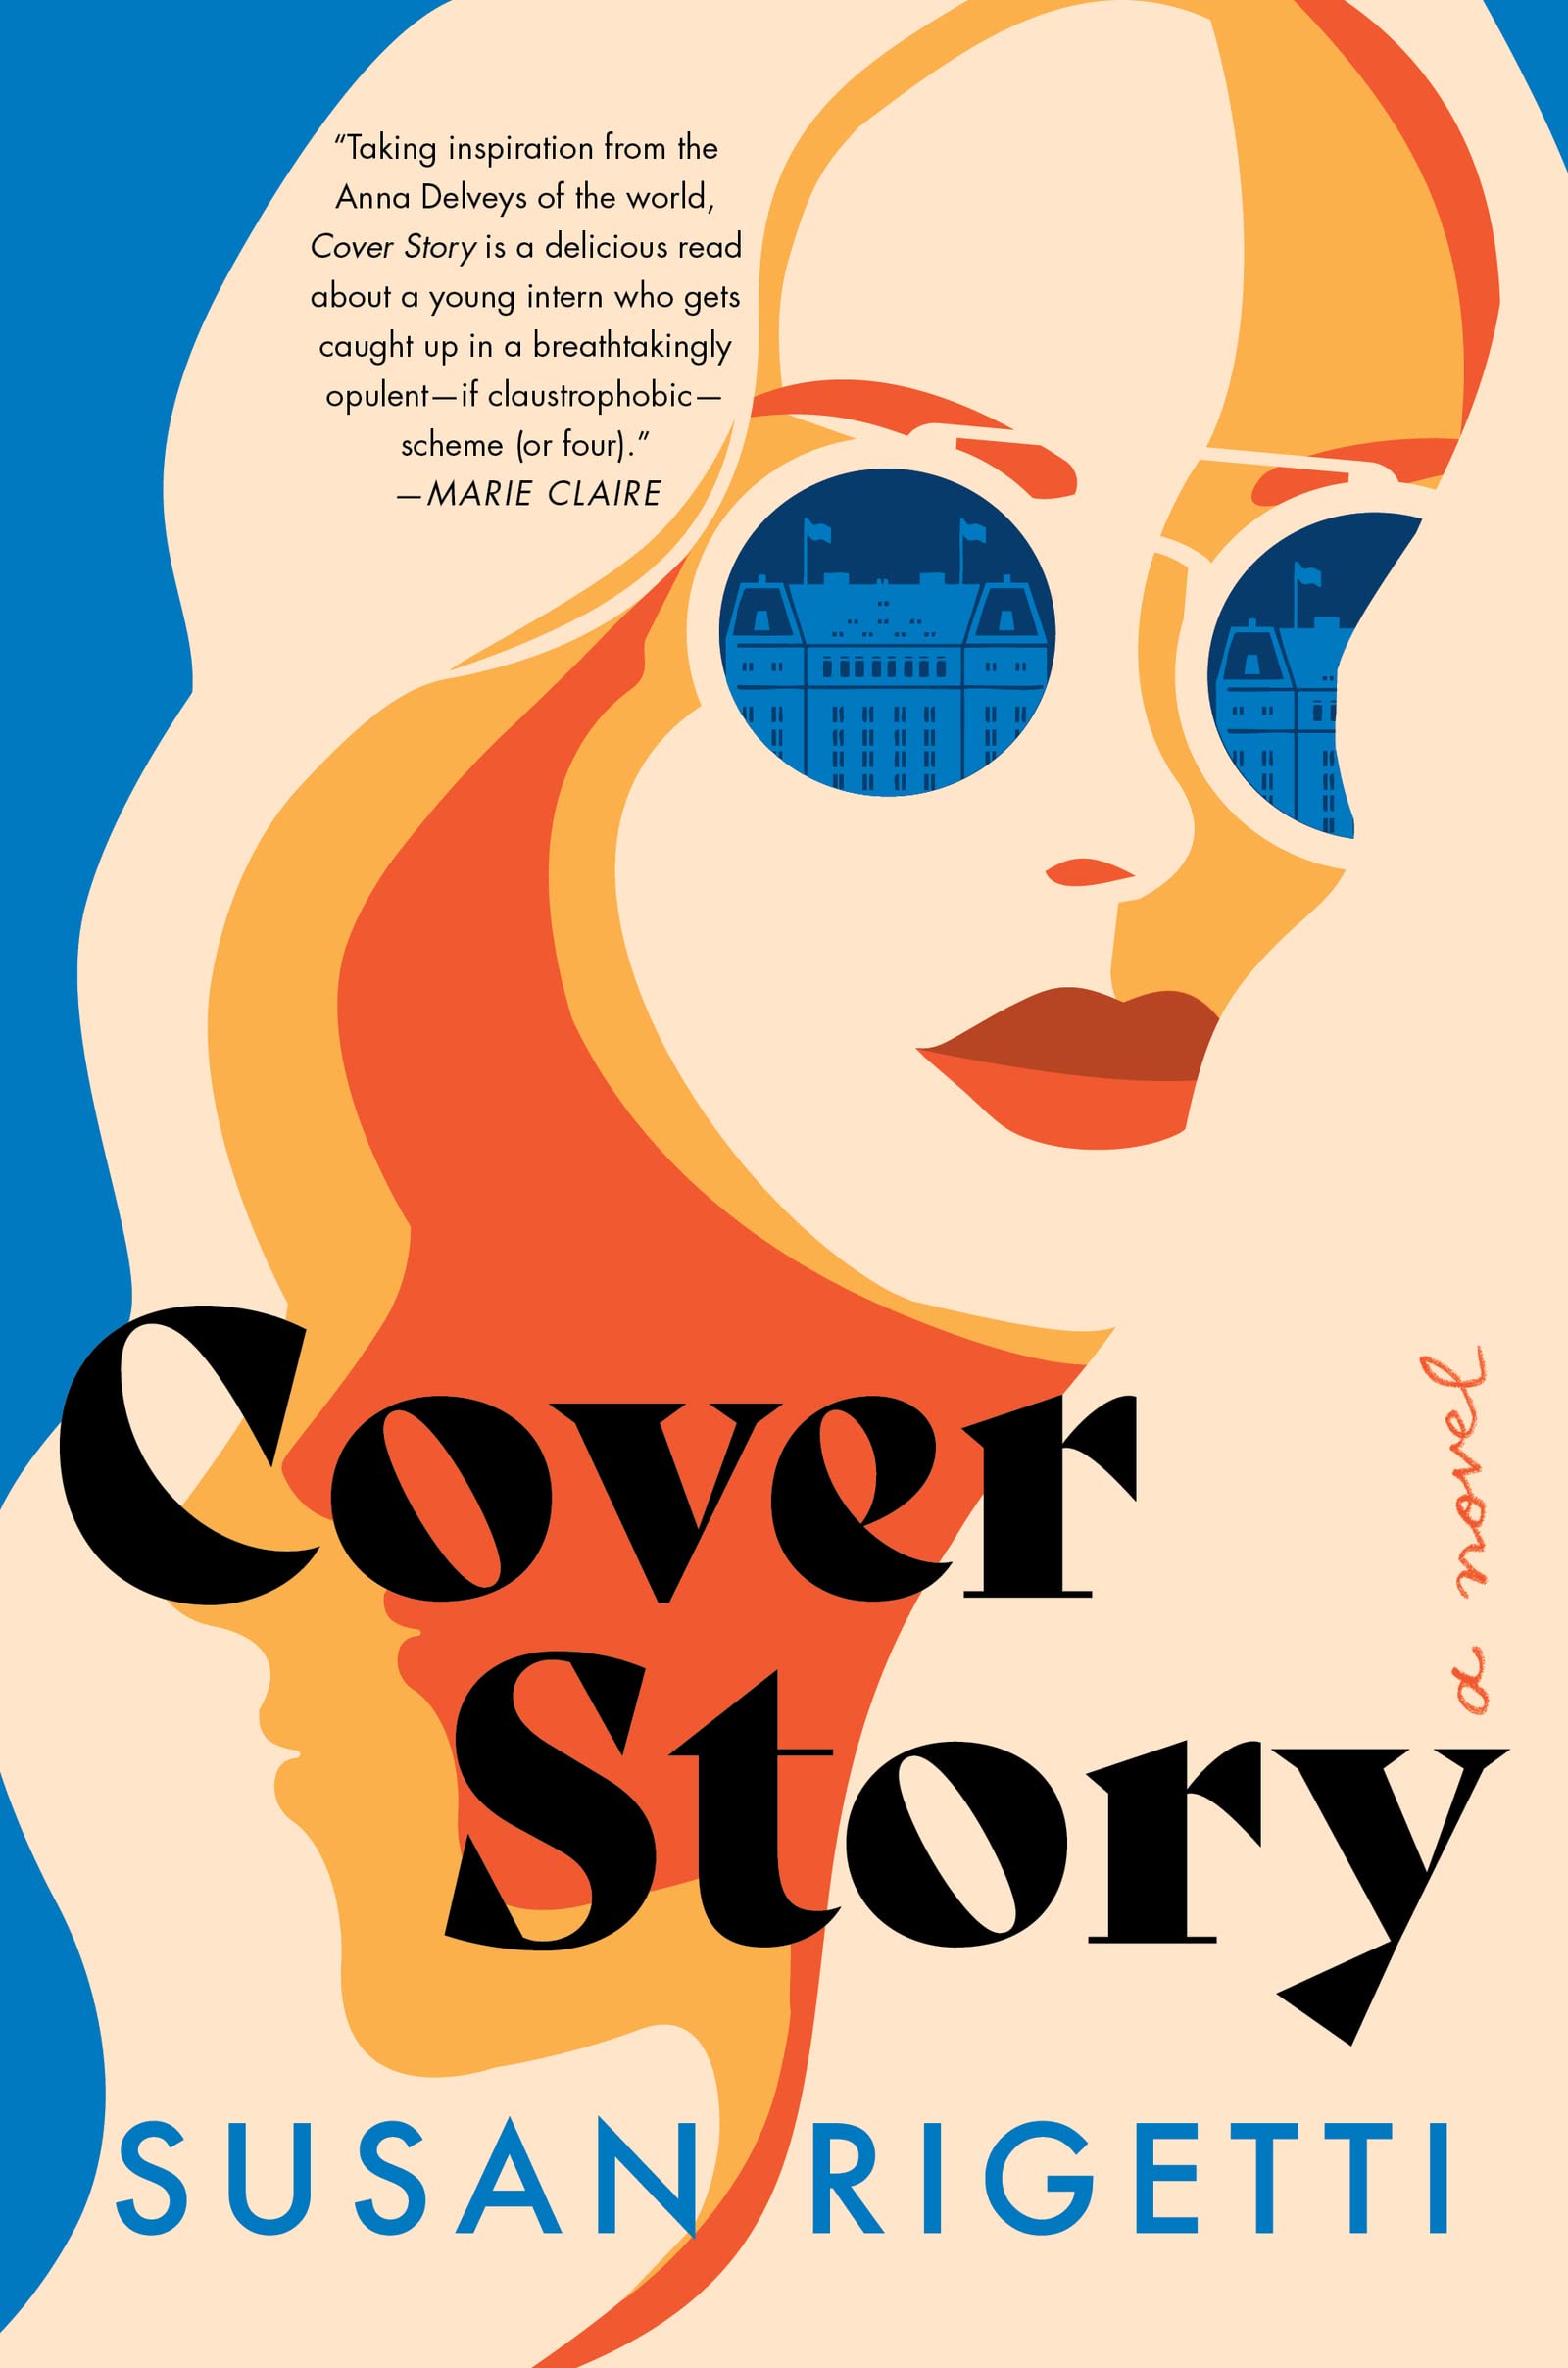 Cover Story - Susan Rigetti book cover